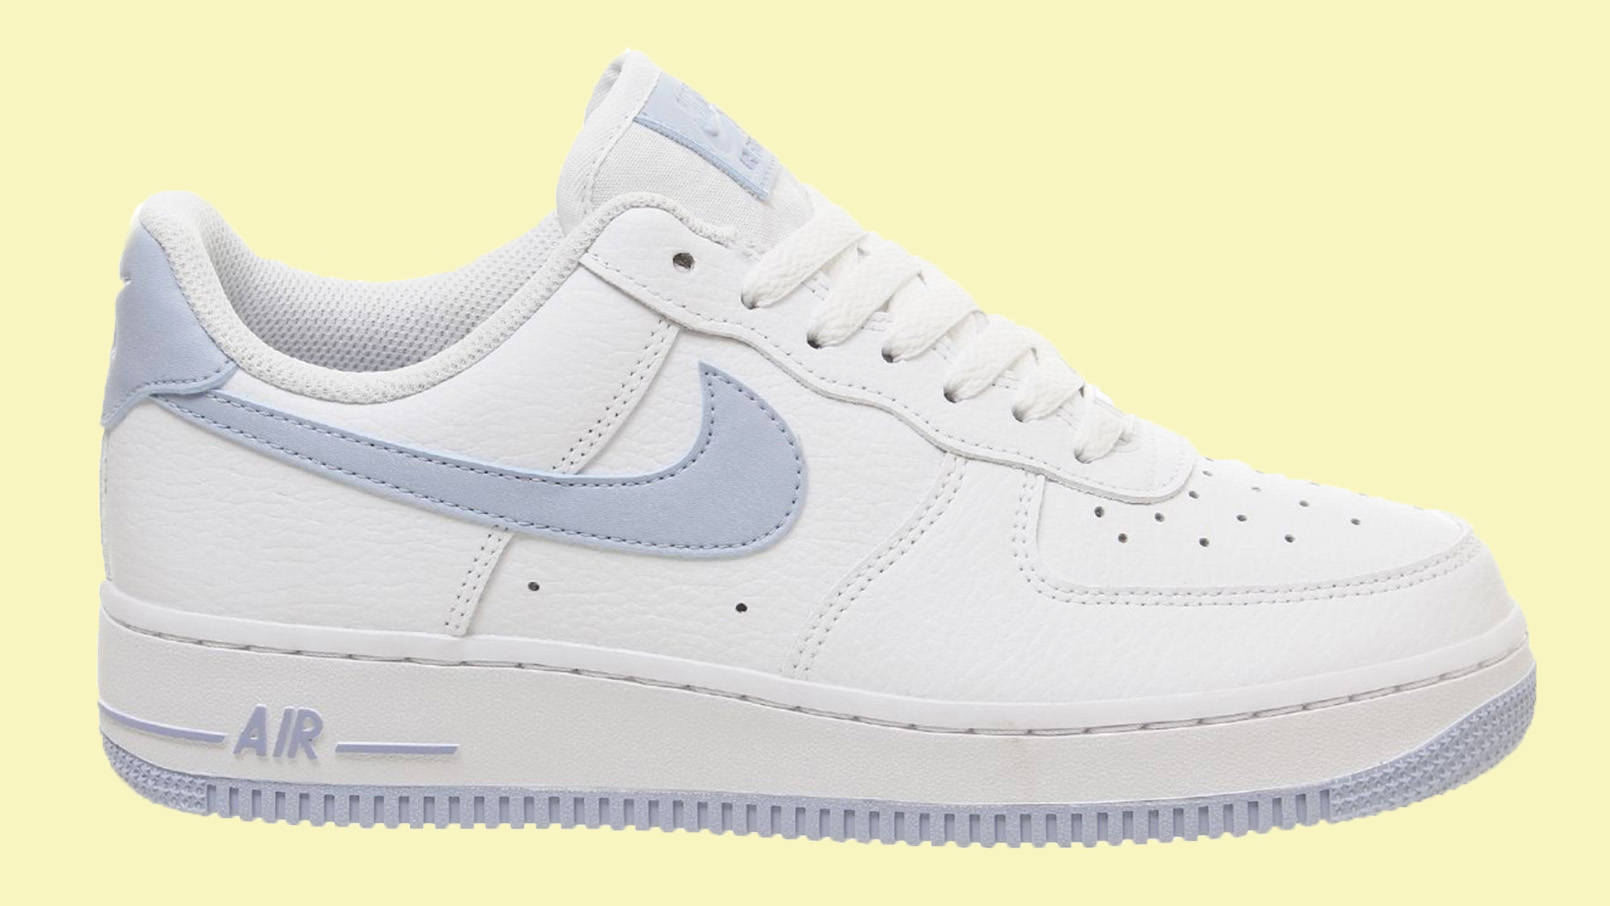 The Nike Air Force 1 Gets A Fresh Blue Update | The Sole Supplier